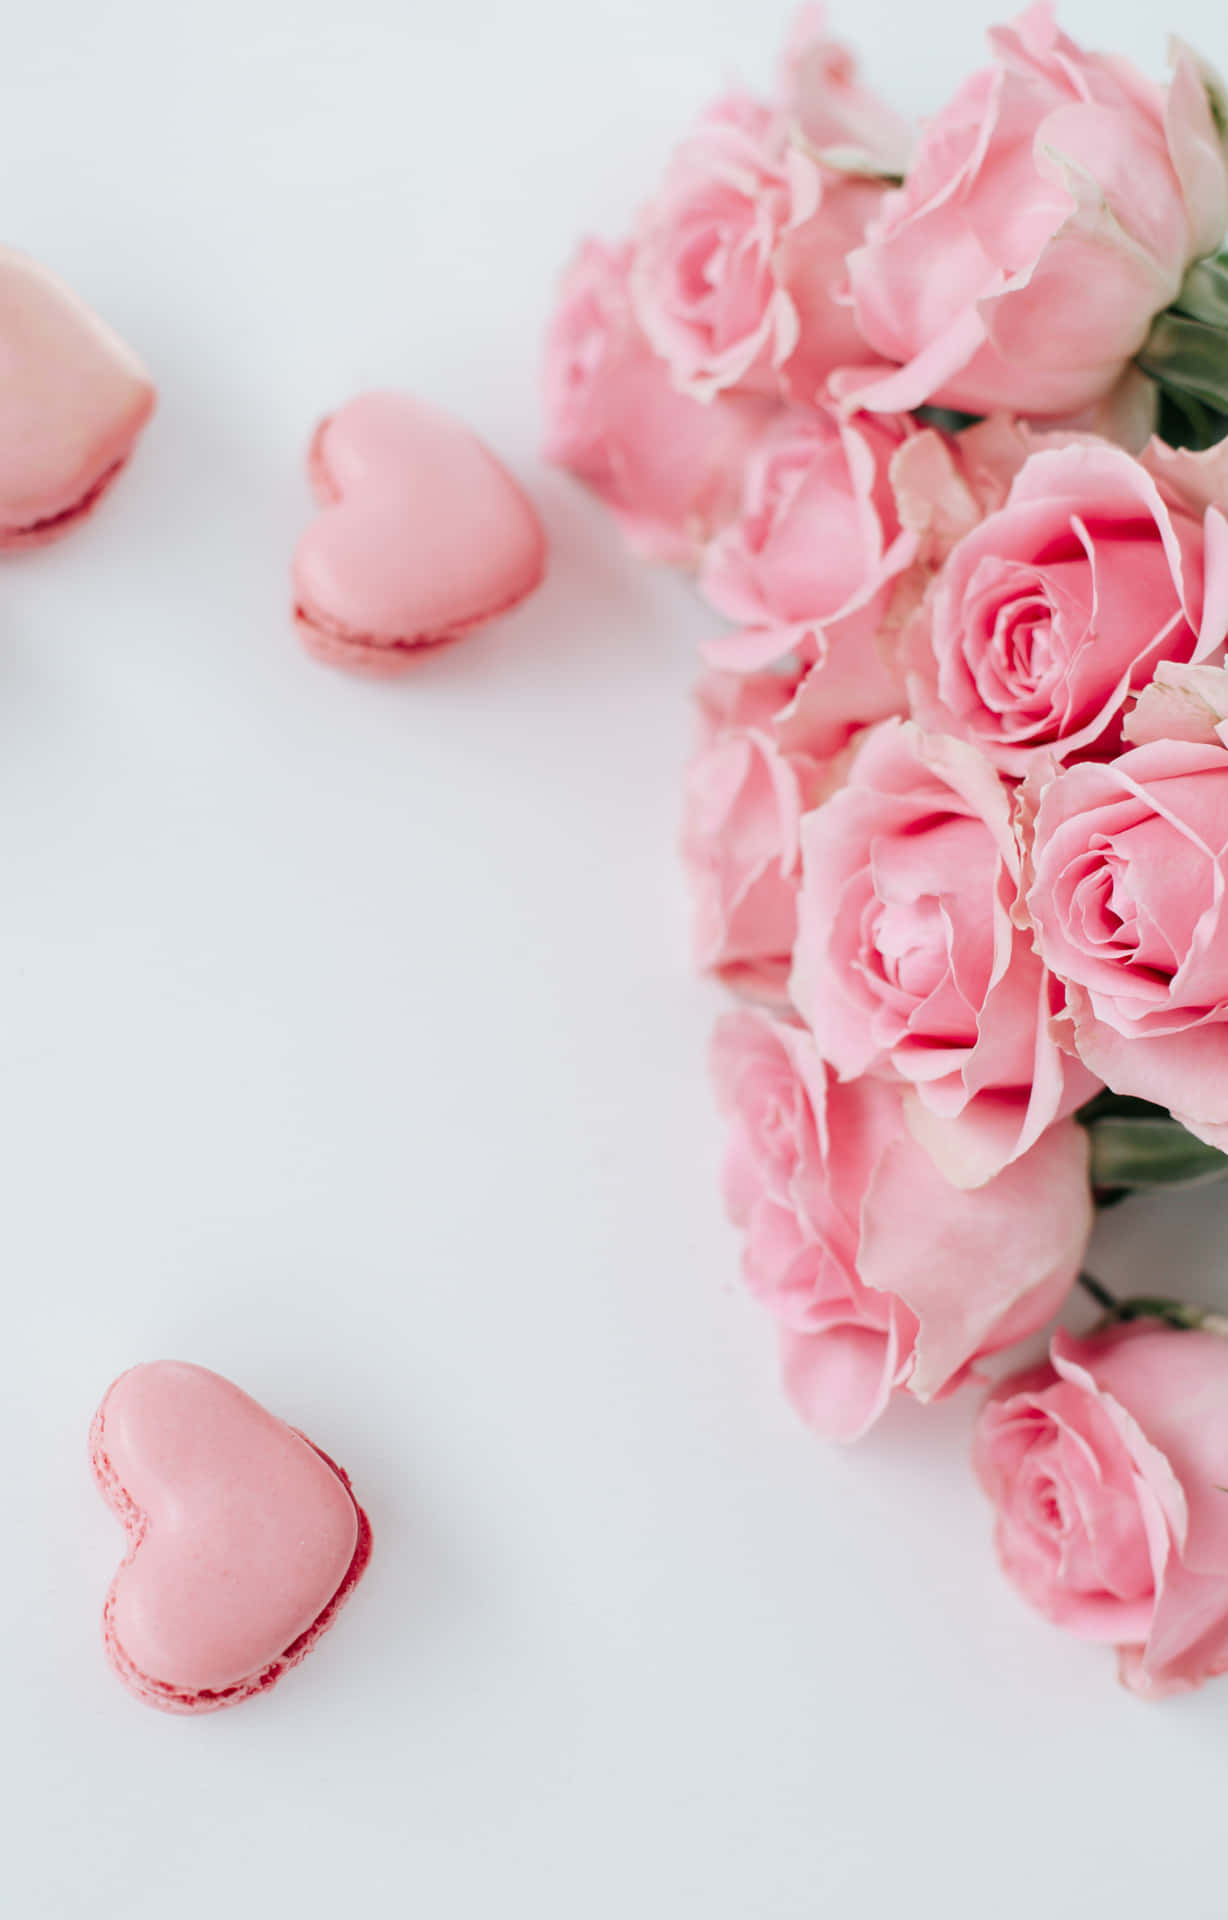 Pink Roses And Macarons On A White Background Wallpaper